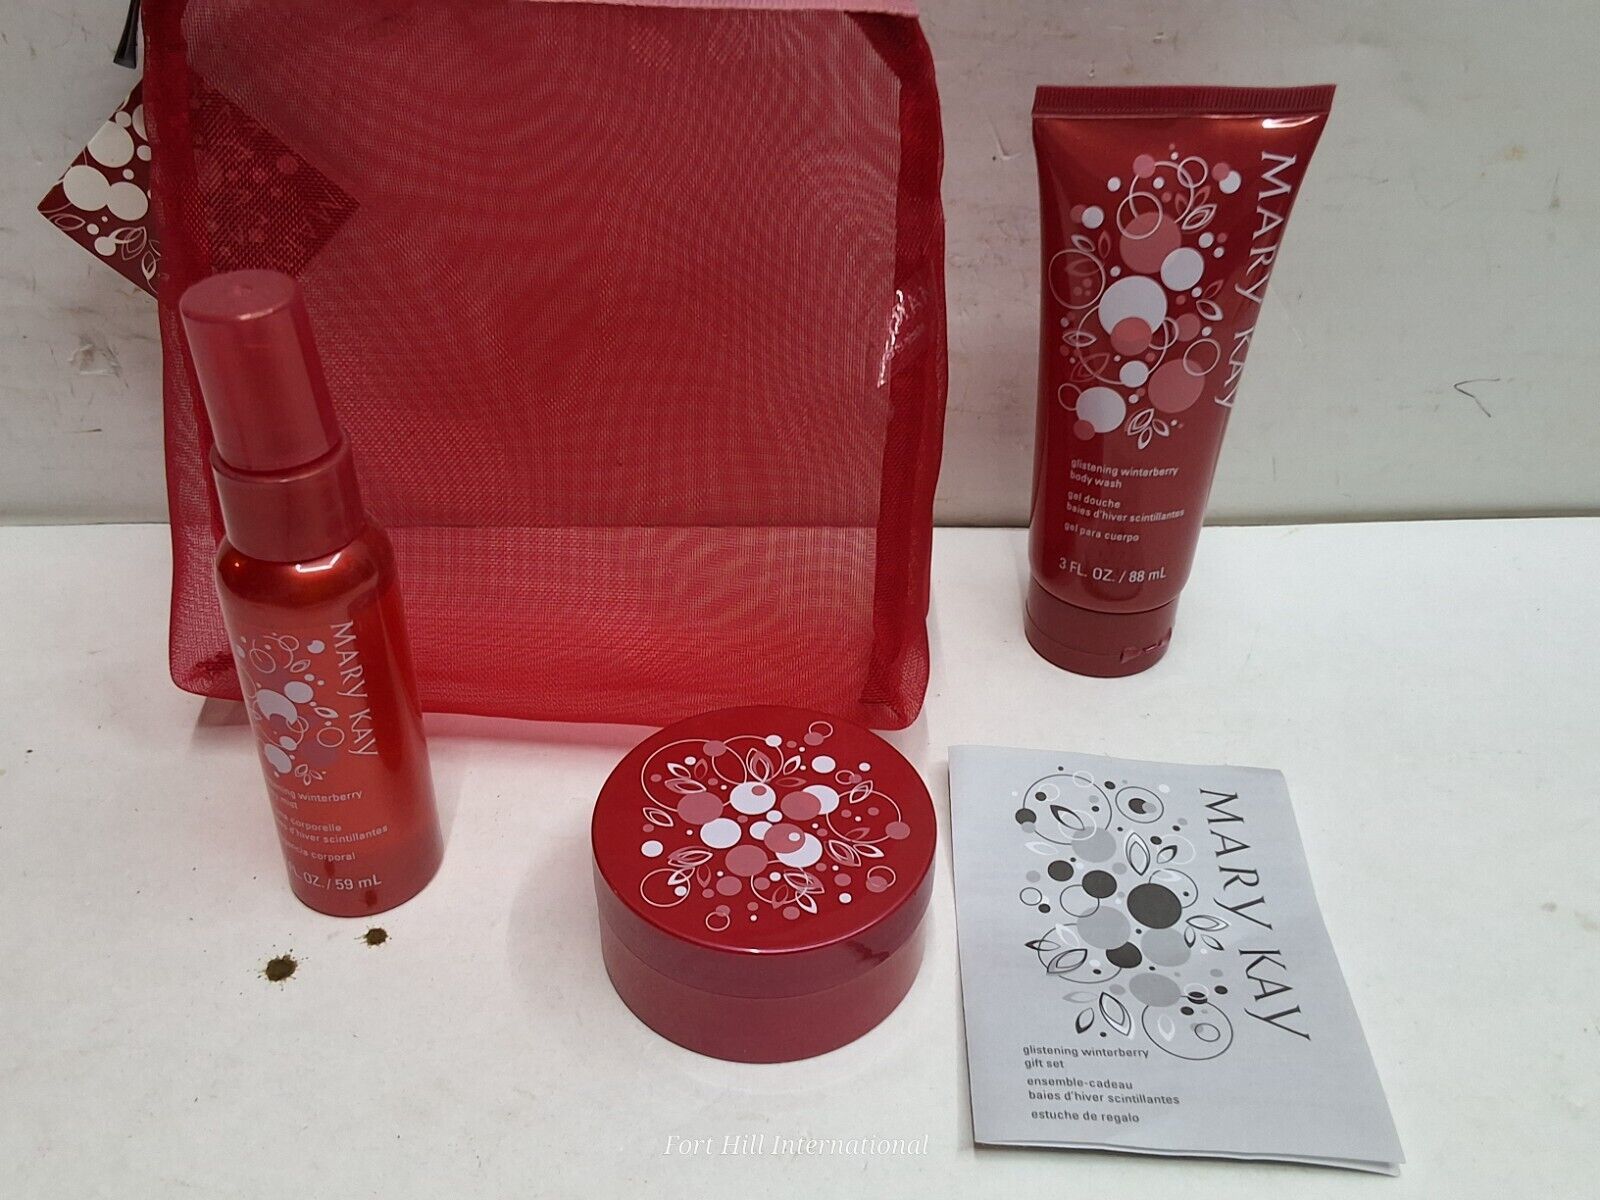 Primary image for Mary Kay listening winterberry body Care gift set body butter body mist body was